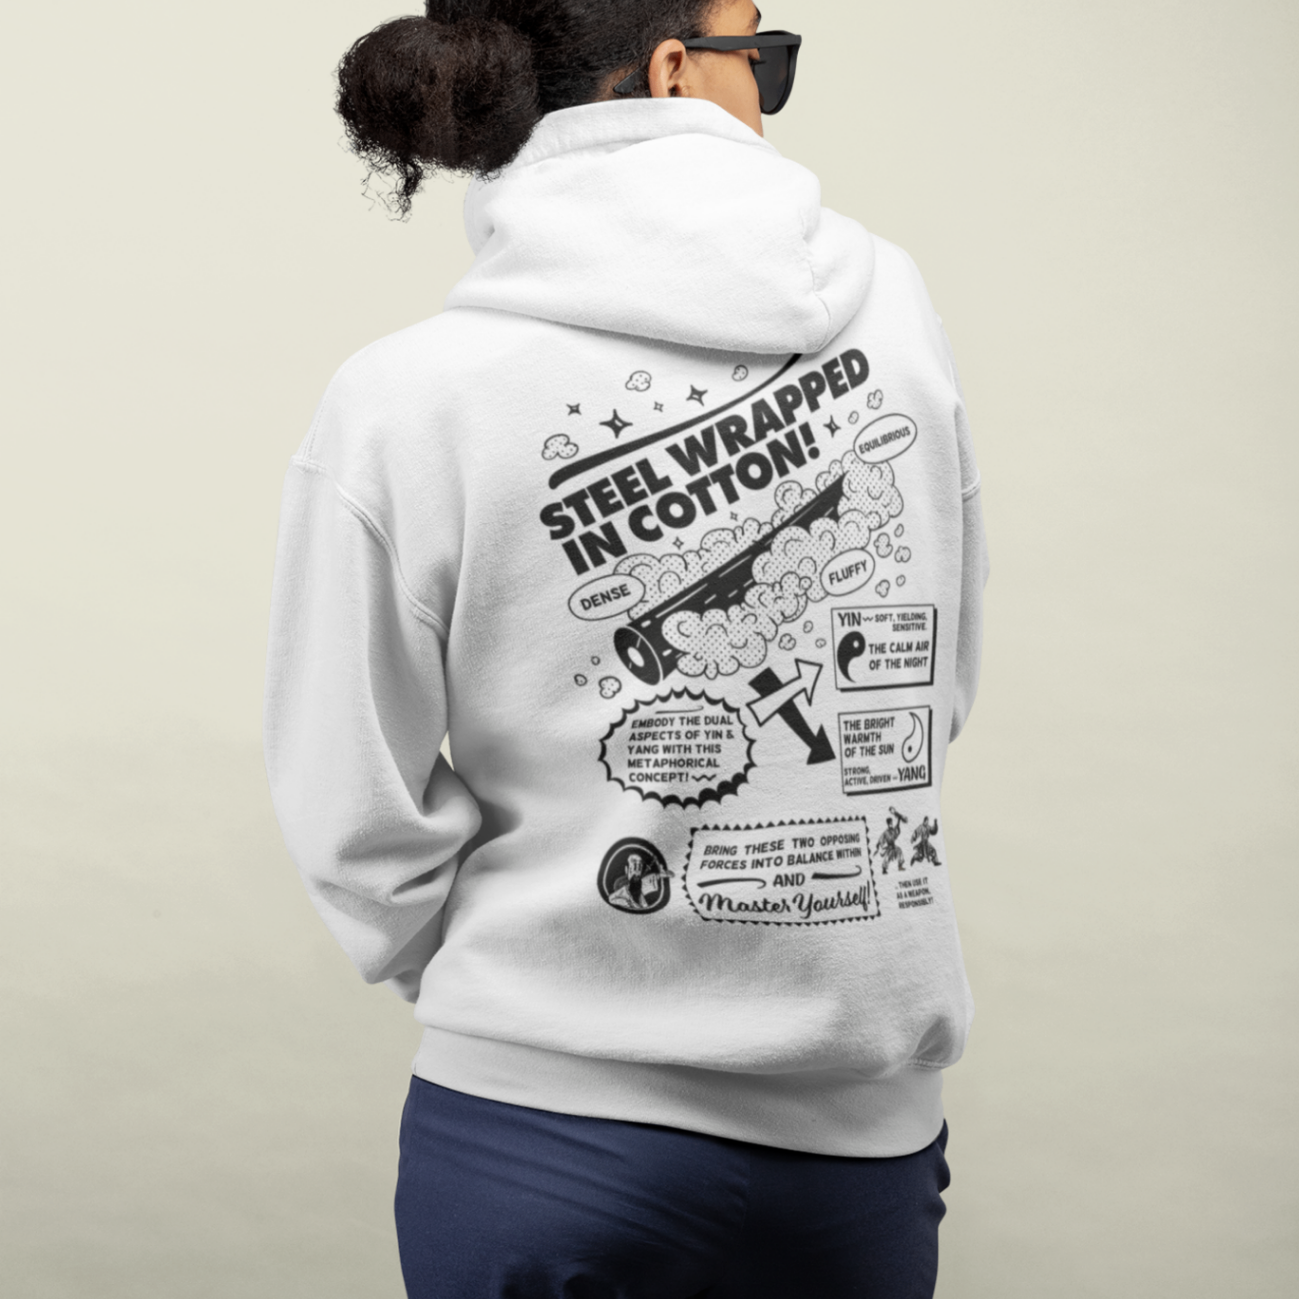  back view of a cool female model wearing a white zip up hoodie with steel wrapped in cotton design in all black text 